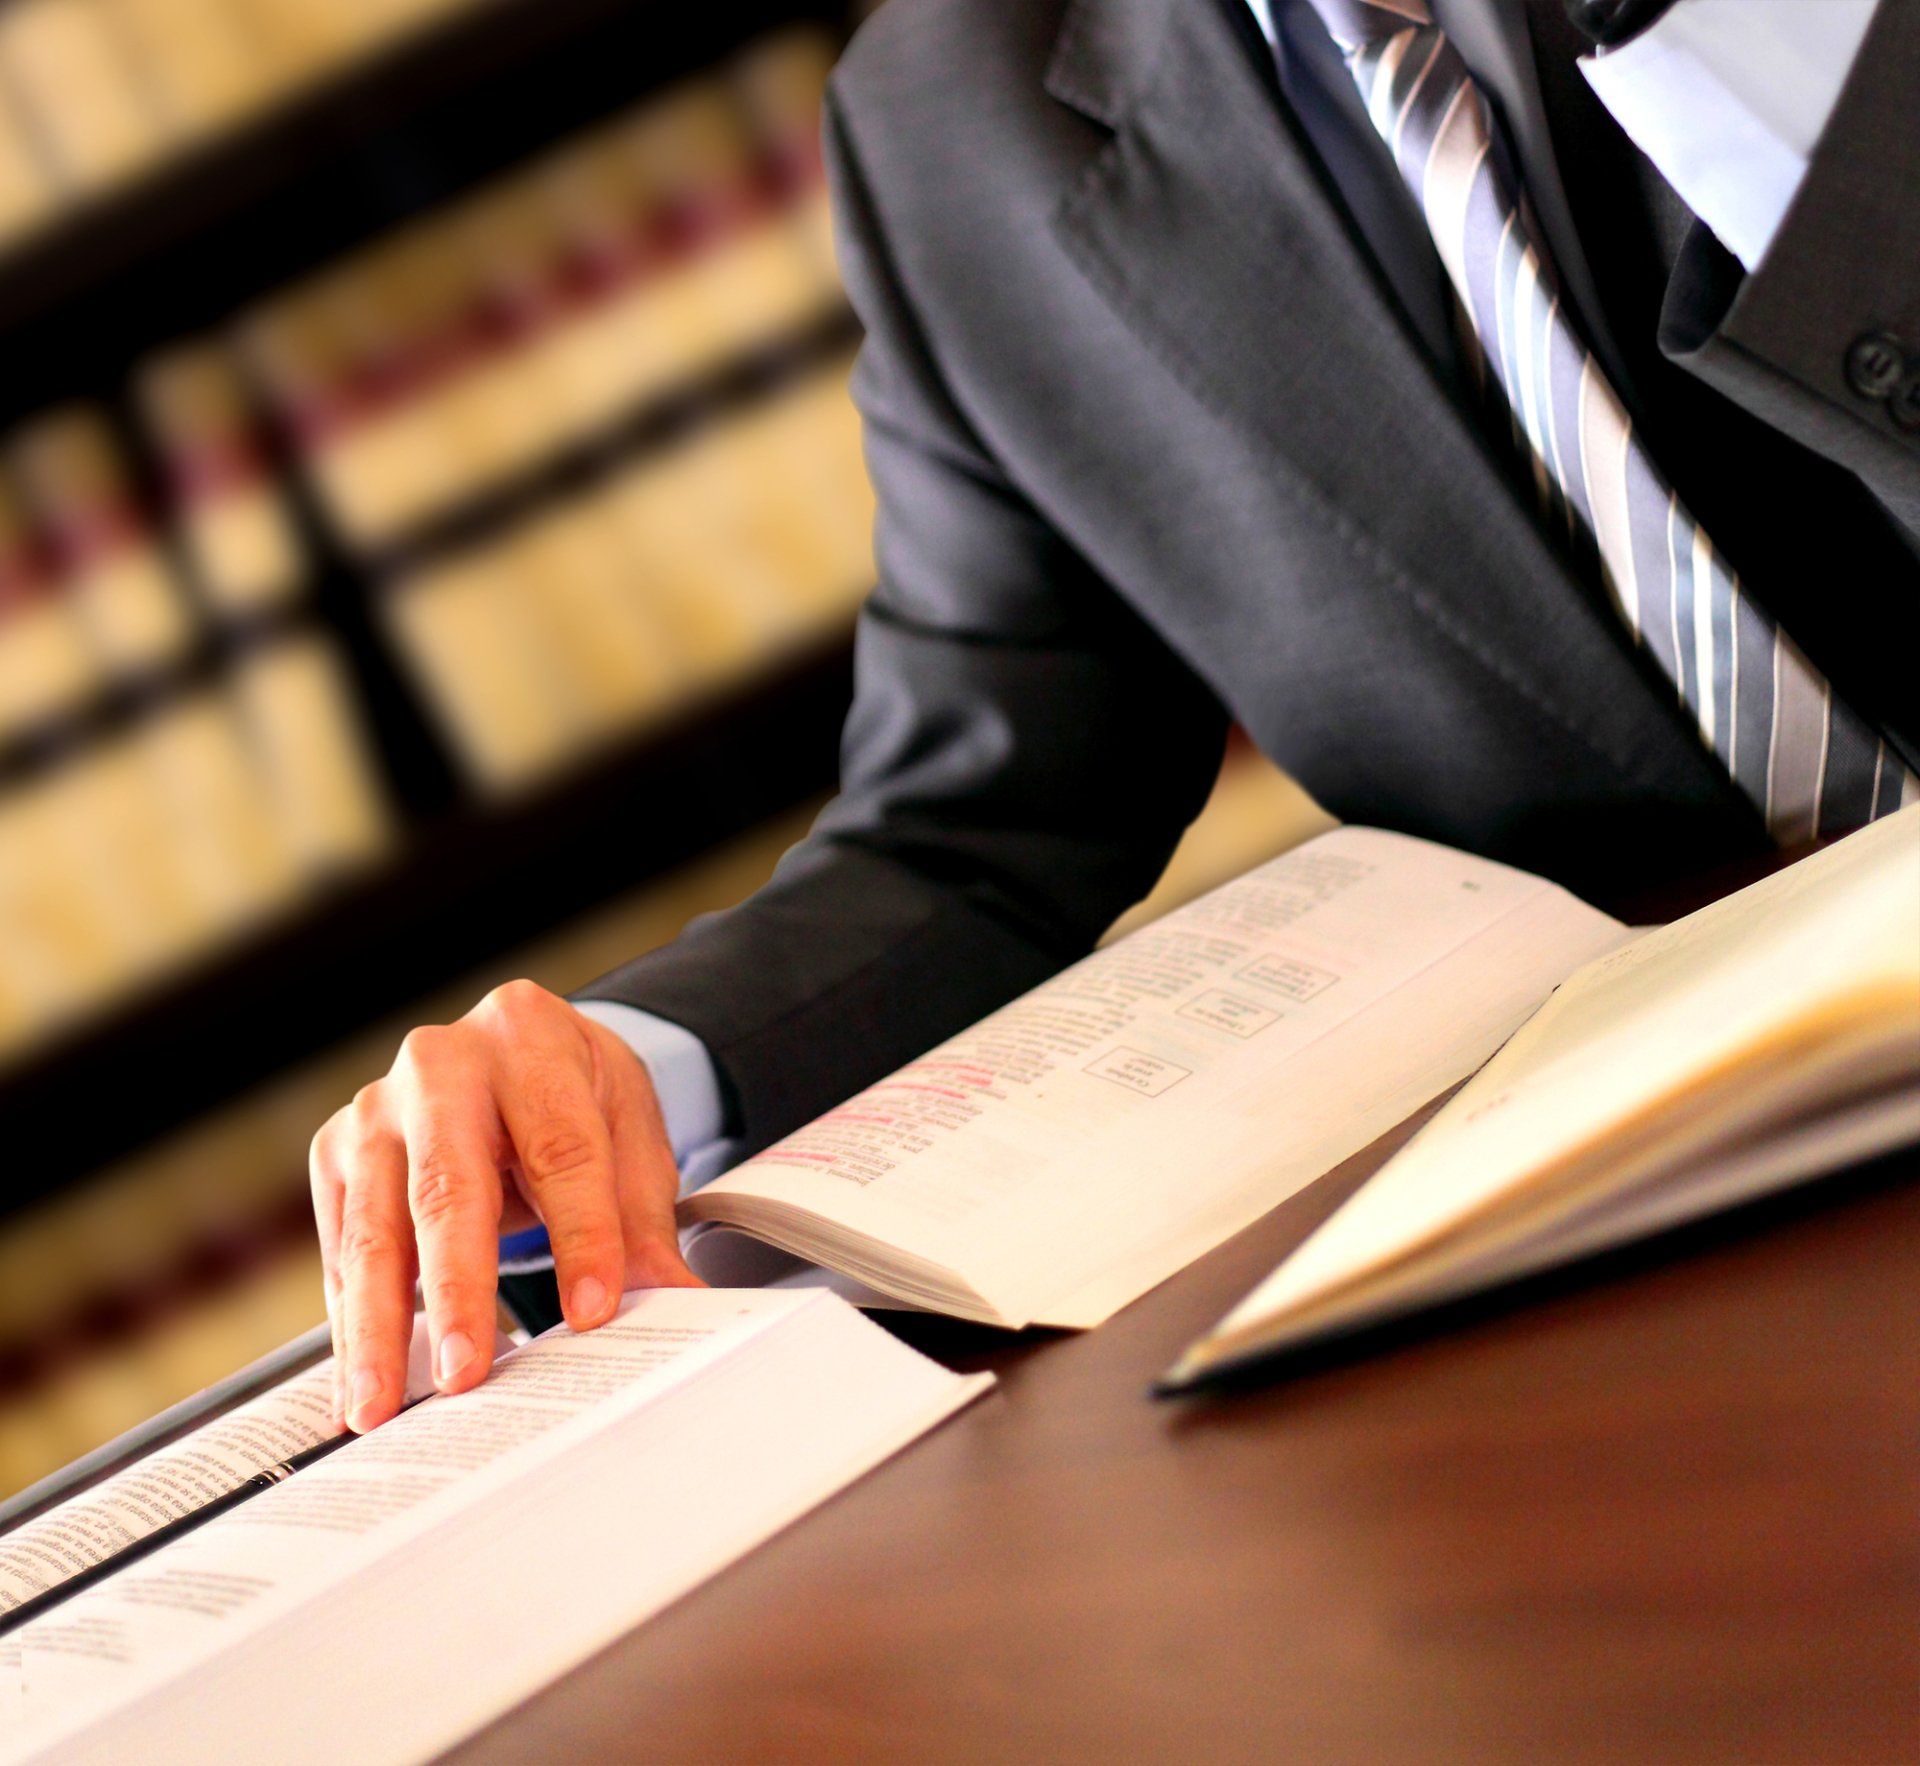 Trusted team offering legal defense services in Hartford, CT